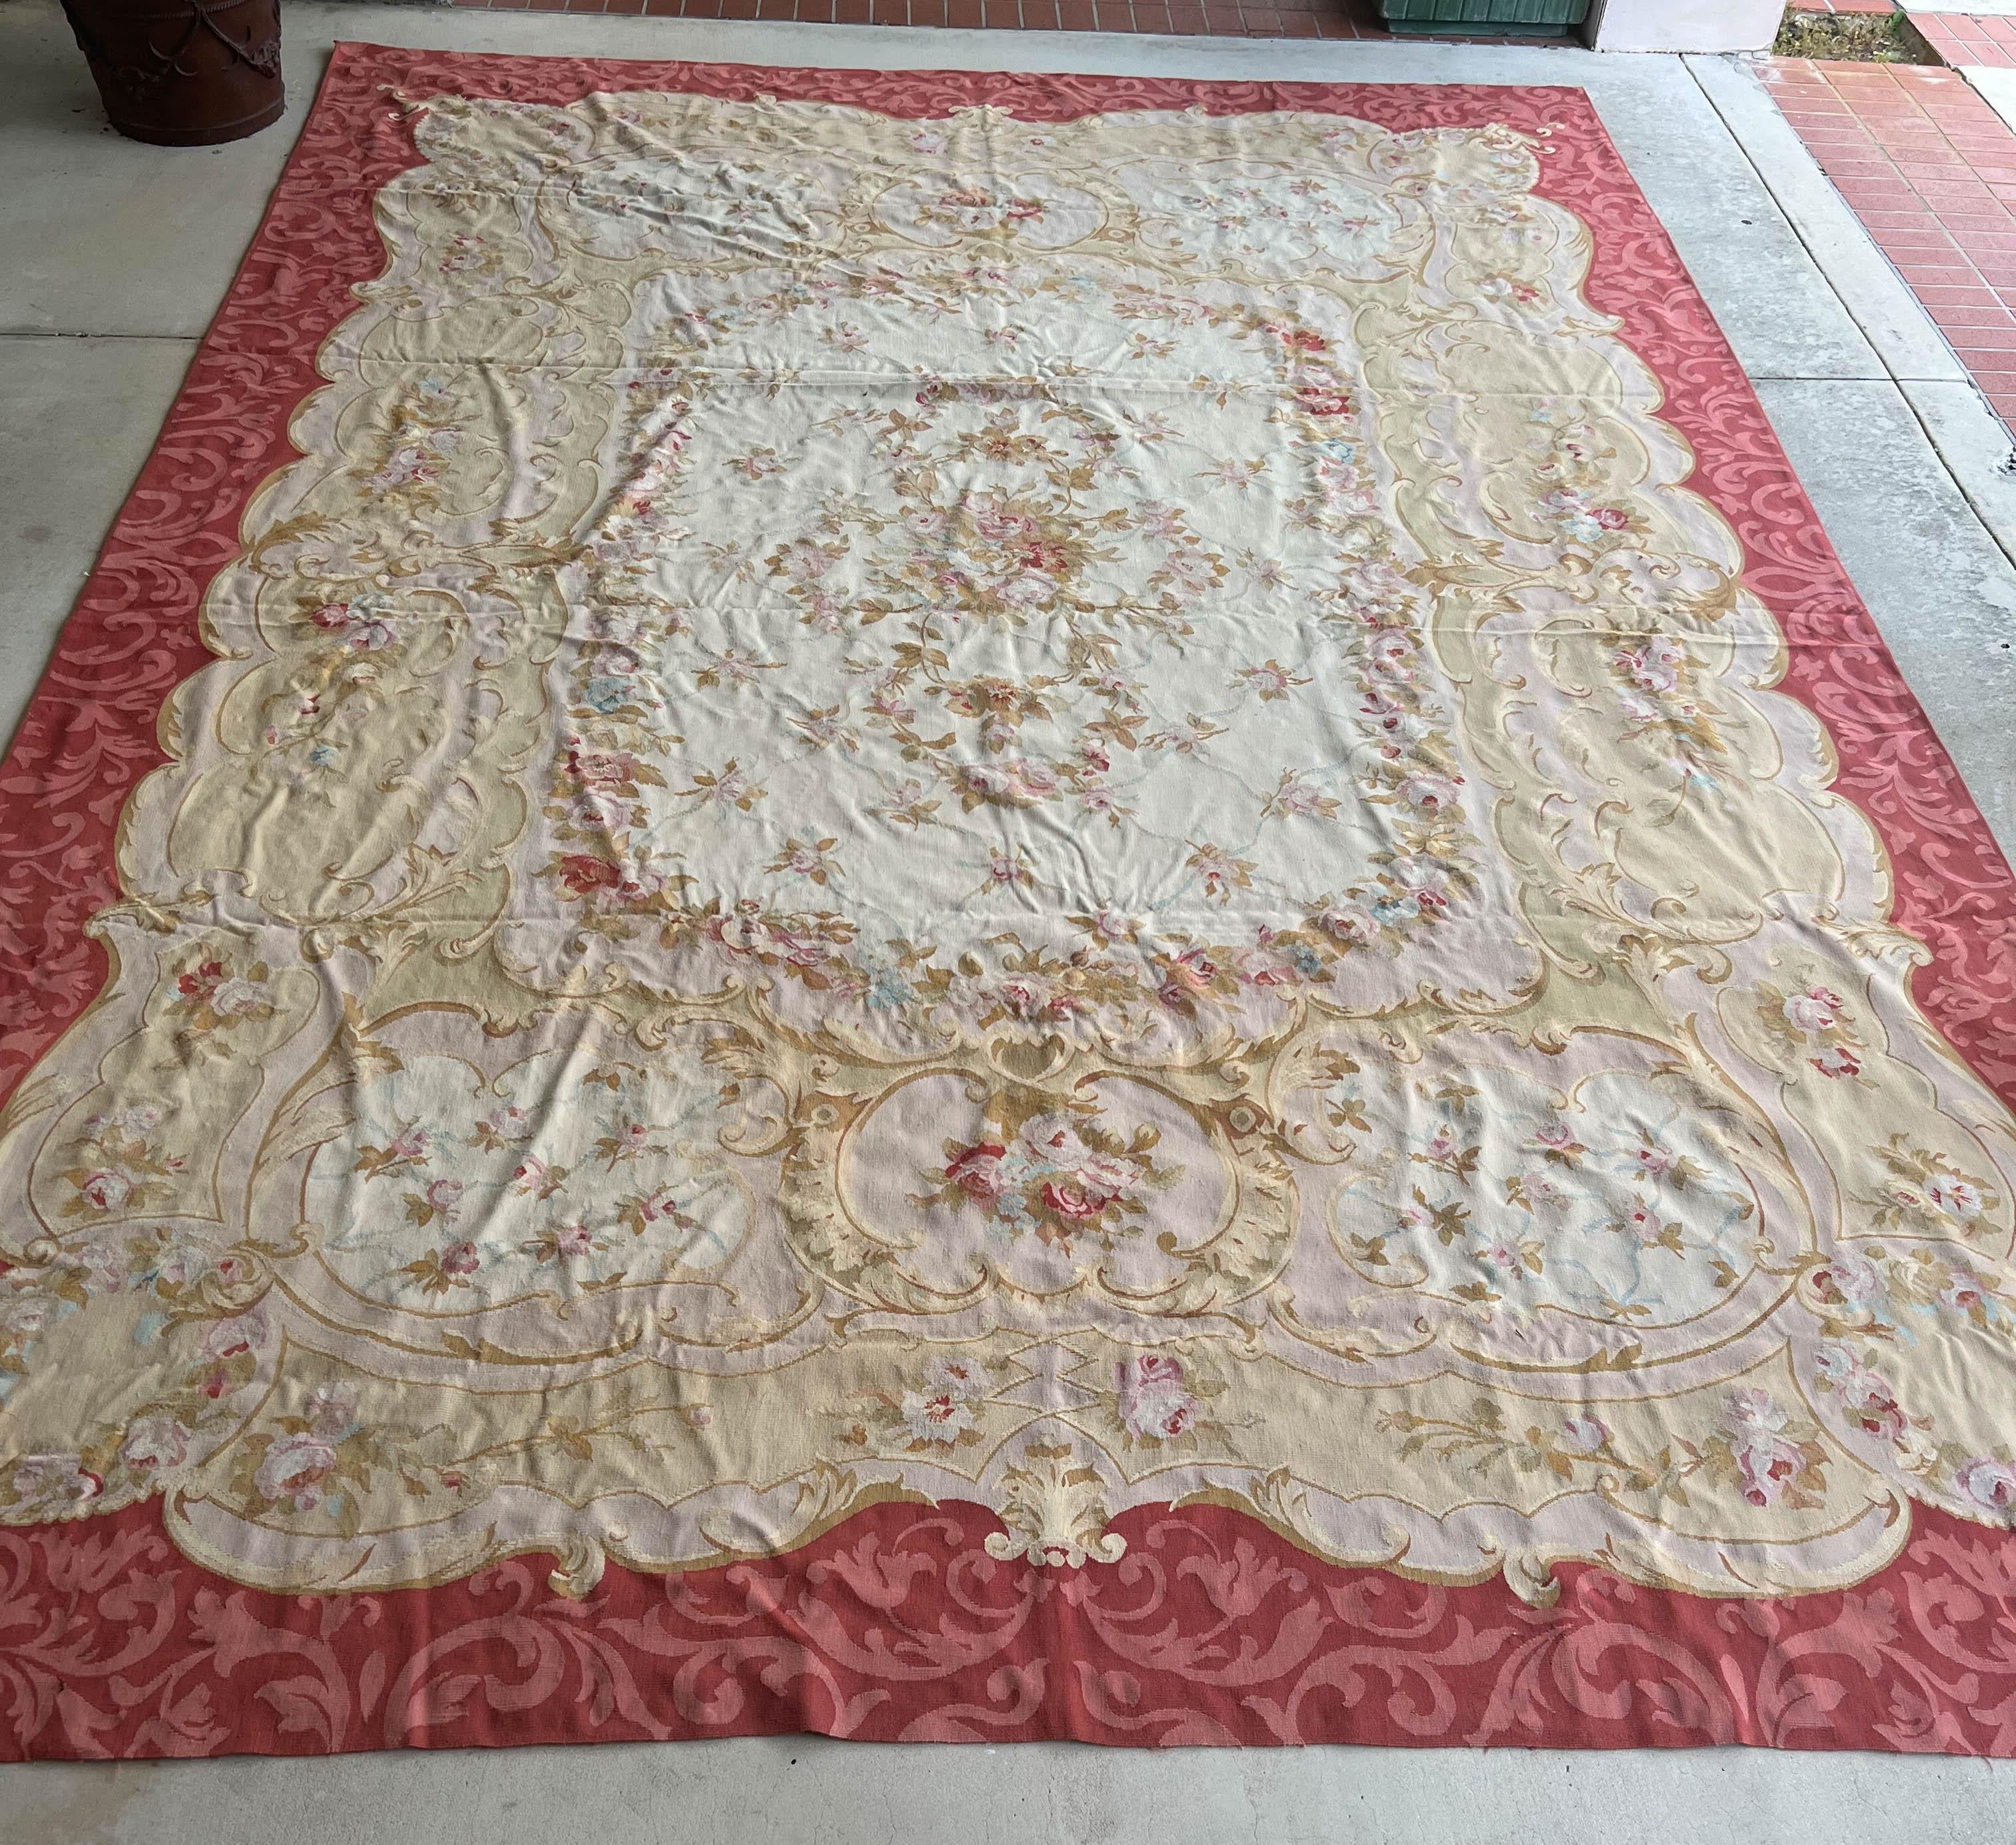 A classically designed Aubusson rug with designs of flowers, foliage, and scrolls surrounded by a pink border. Aubusson carpets are pileless and woven in the same way as tapestries.
Situated on the banks of the River Creuse in France, Aubusson had